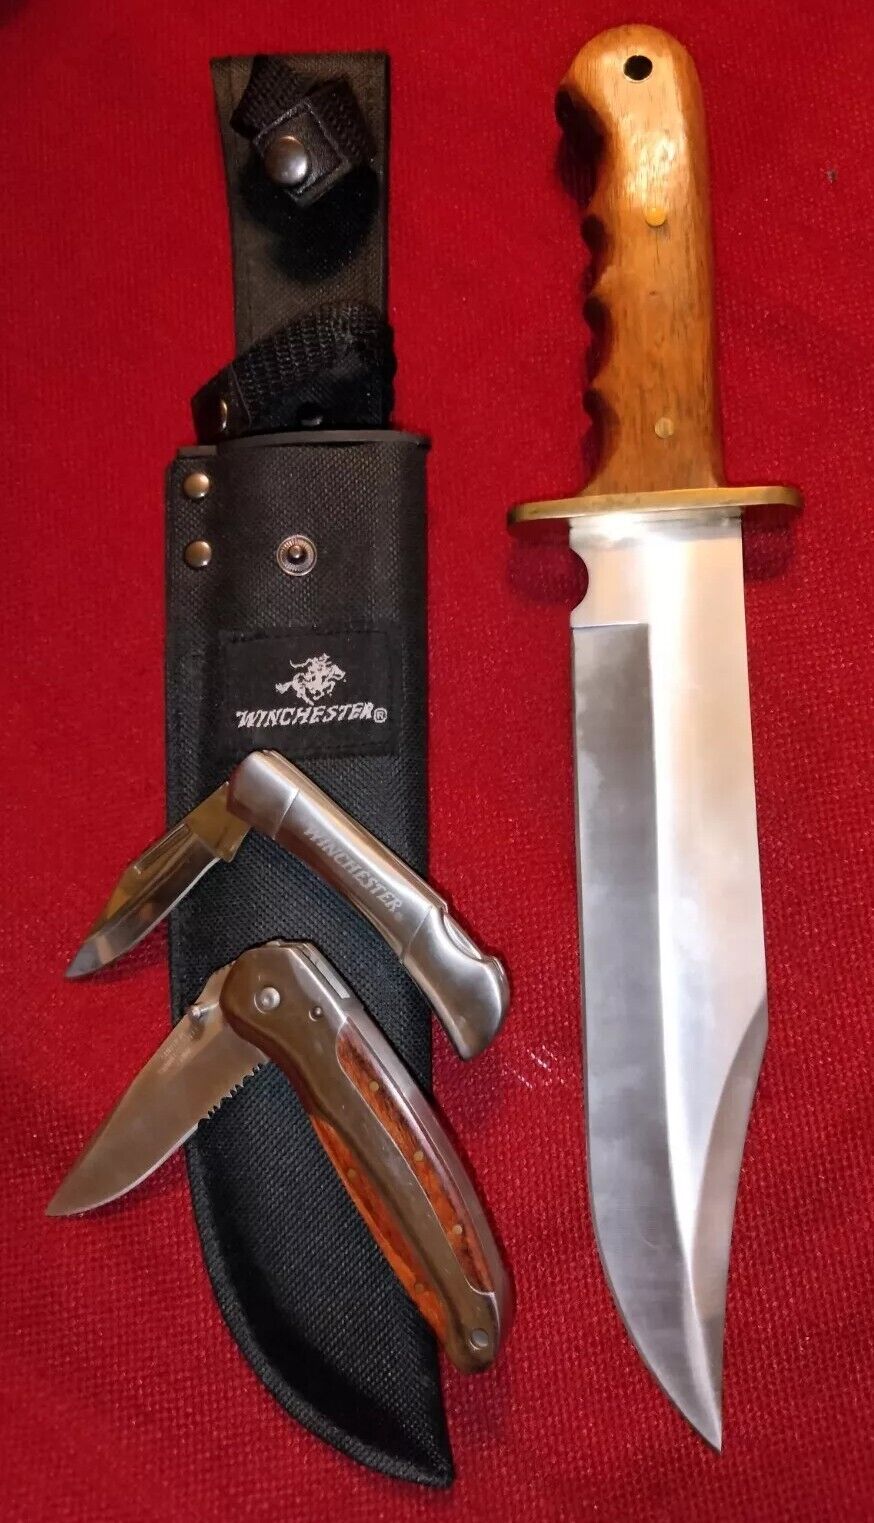 Winchester knives 3 pc lot: large bowie, 2 pocket knives, very good condition 